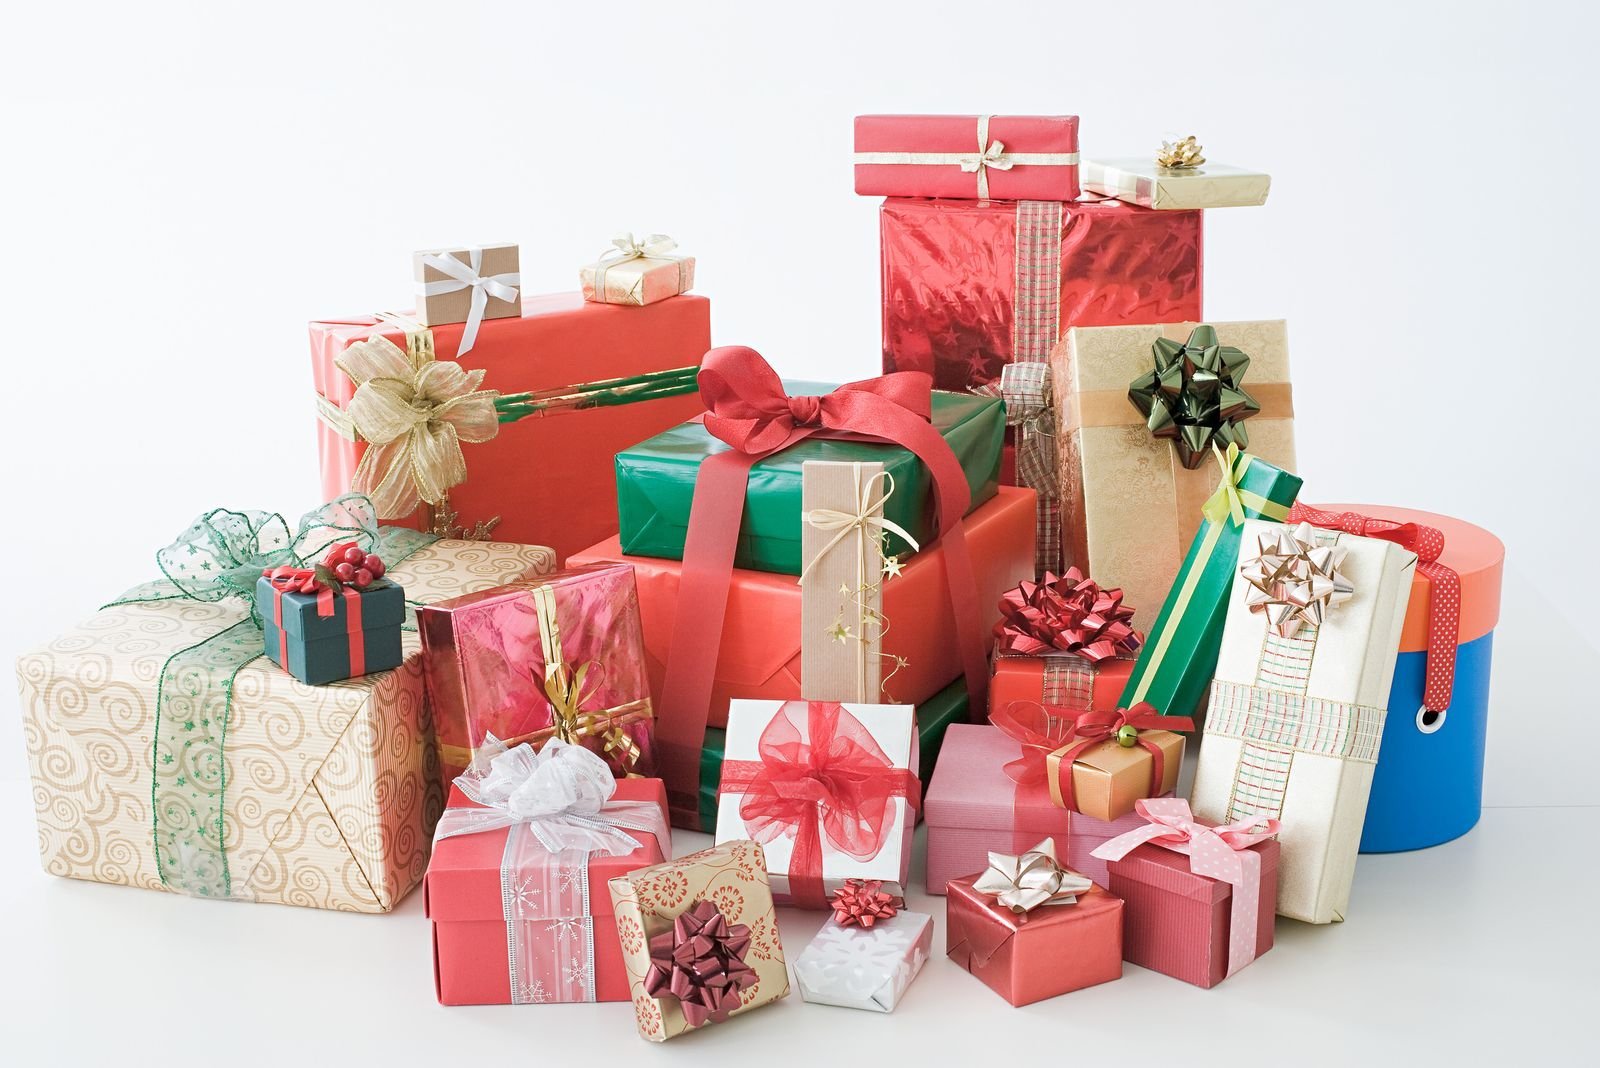 Kinds of presents